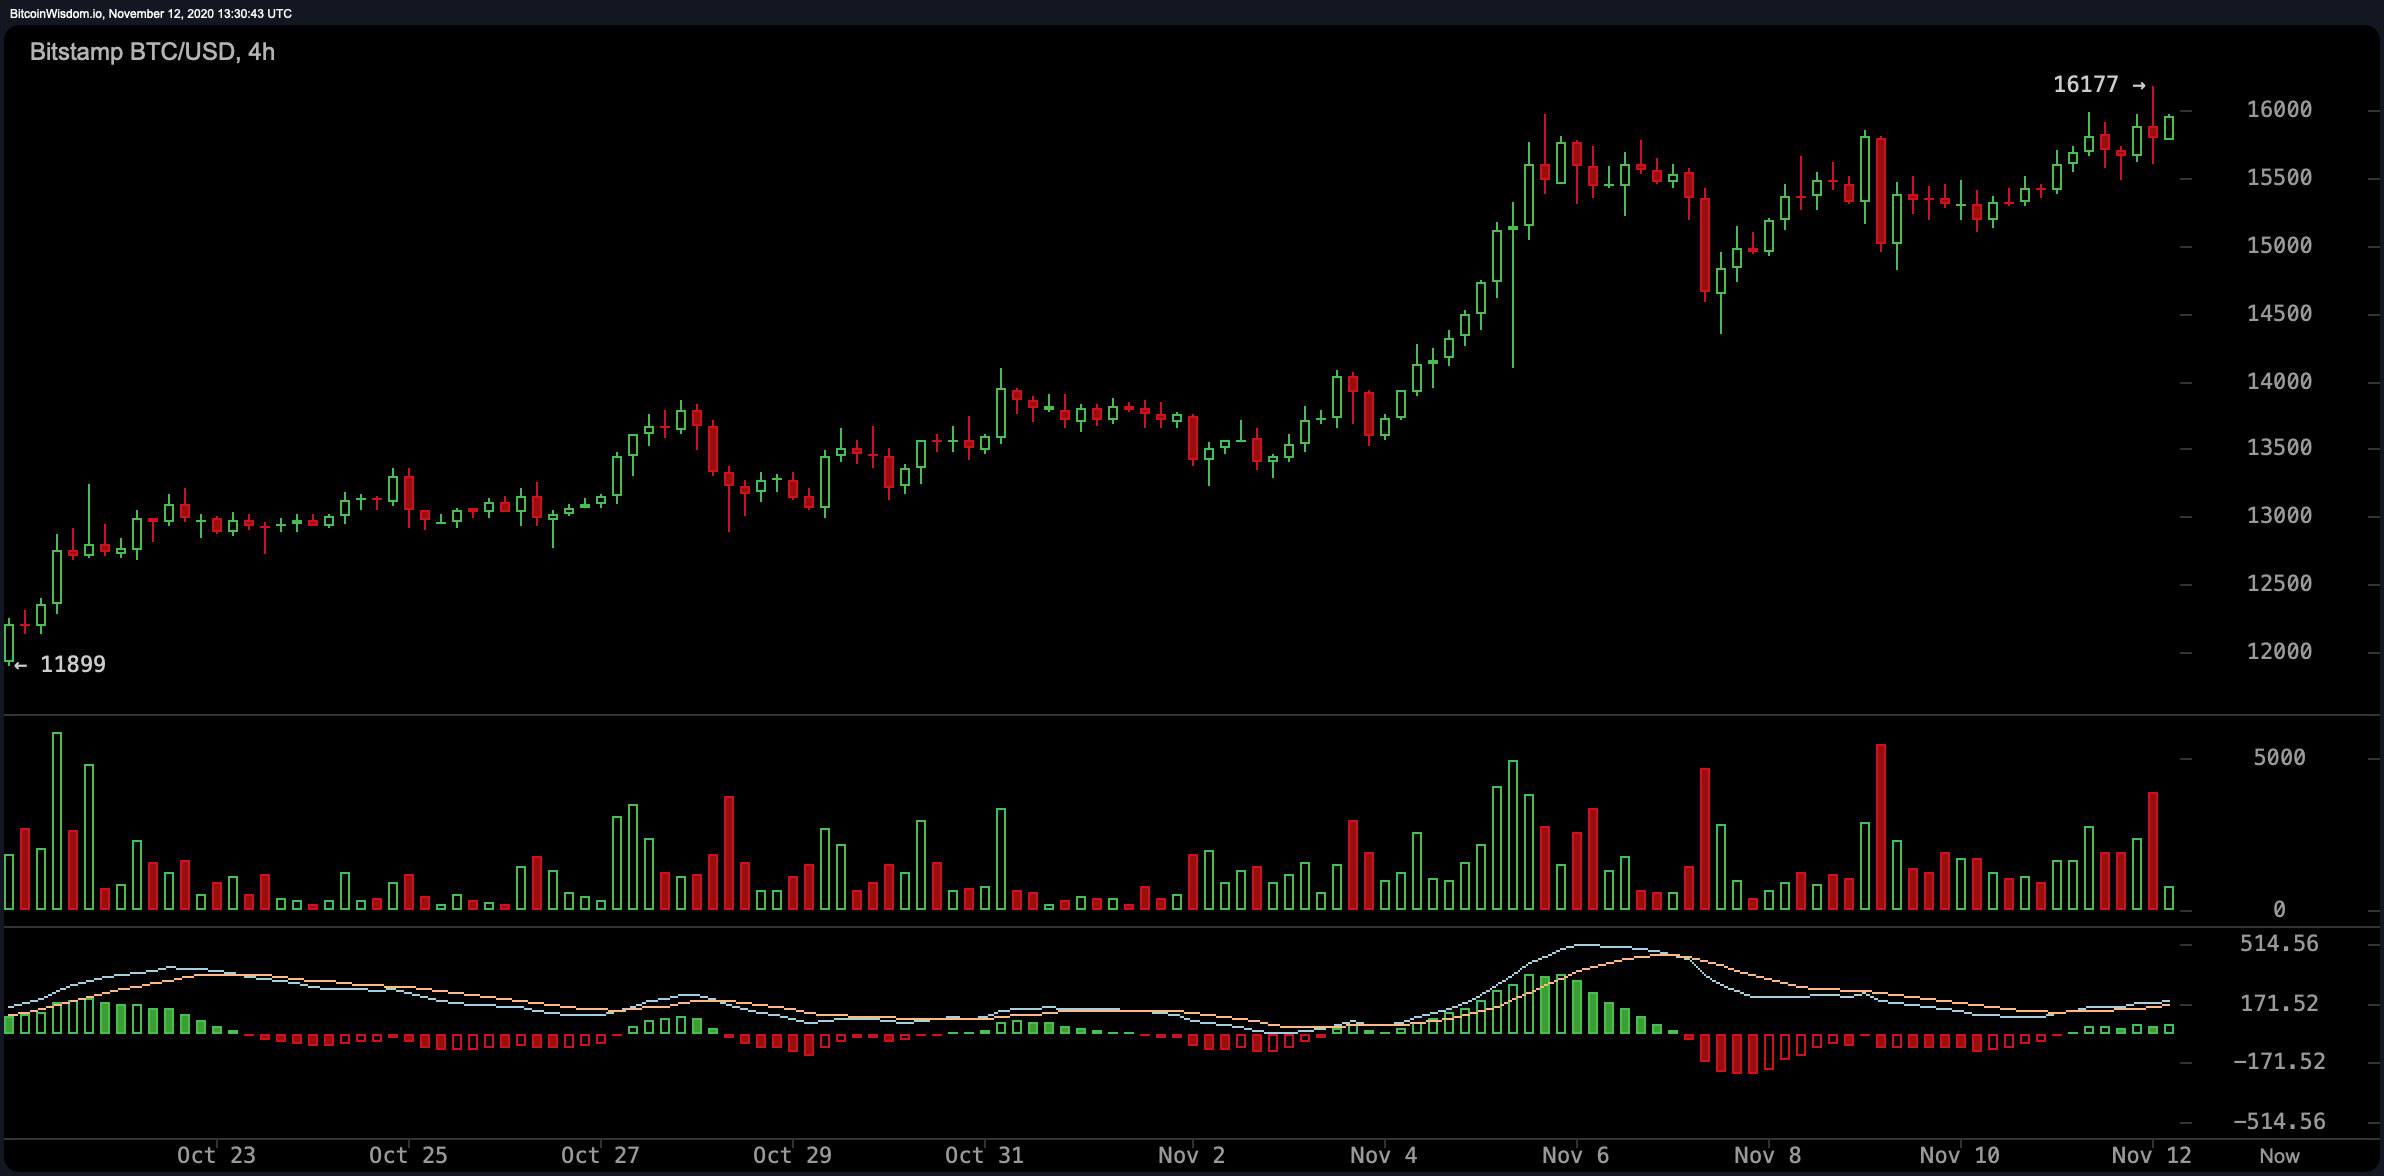  Bitcoin Spikes Over $16K, RSI Levels Warm Up, Price Retracts for Another Attempt